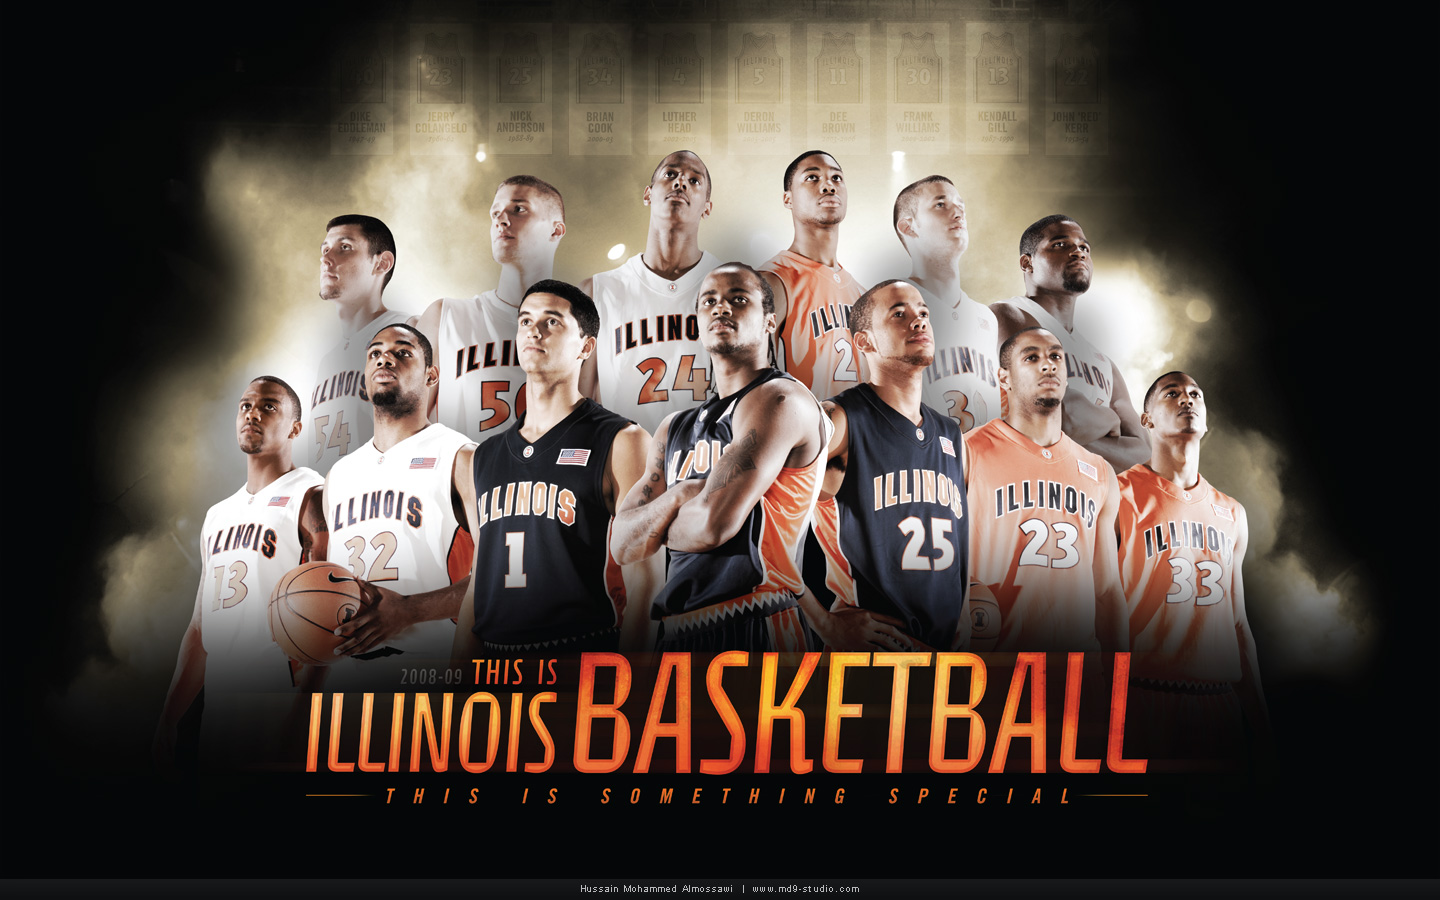 Illinois Basketball Poster By Mossawi